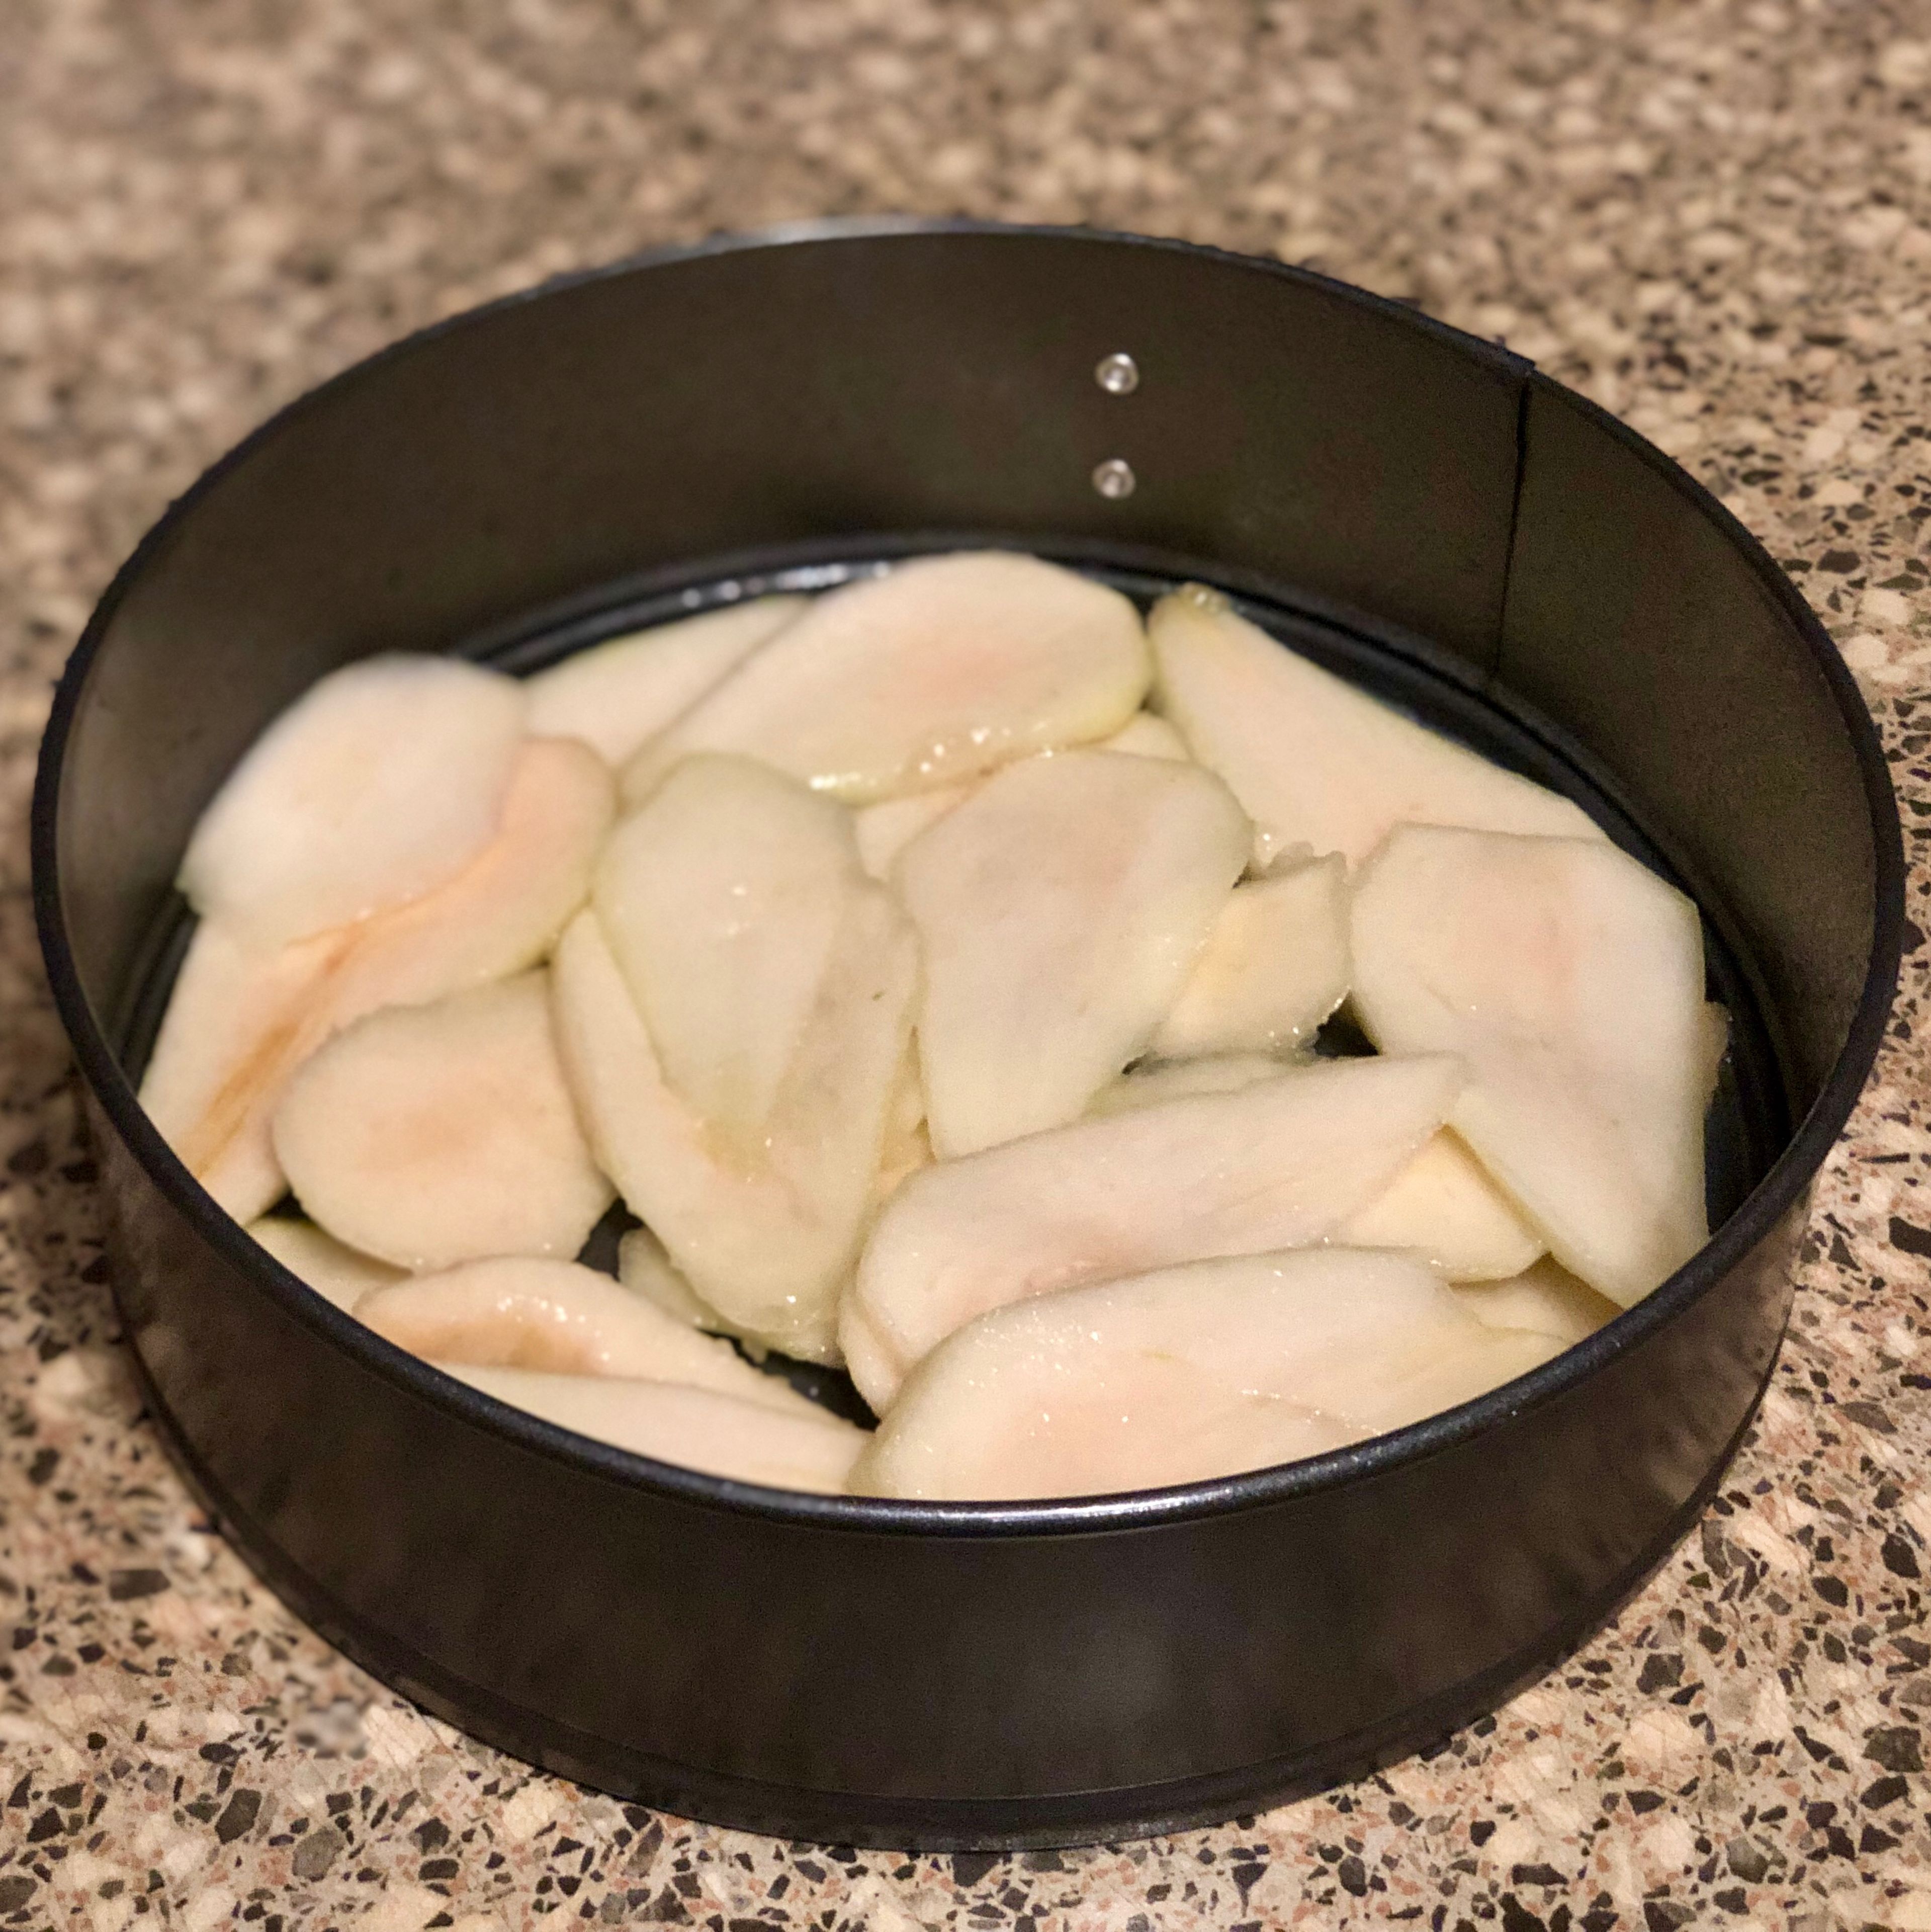 Arrange the pear slices on the bottom of the springform pan.